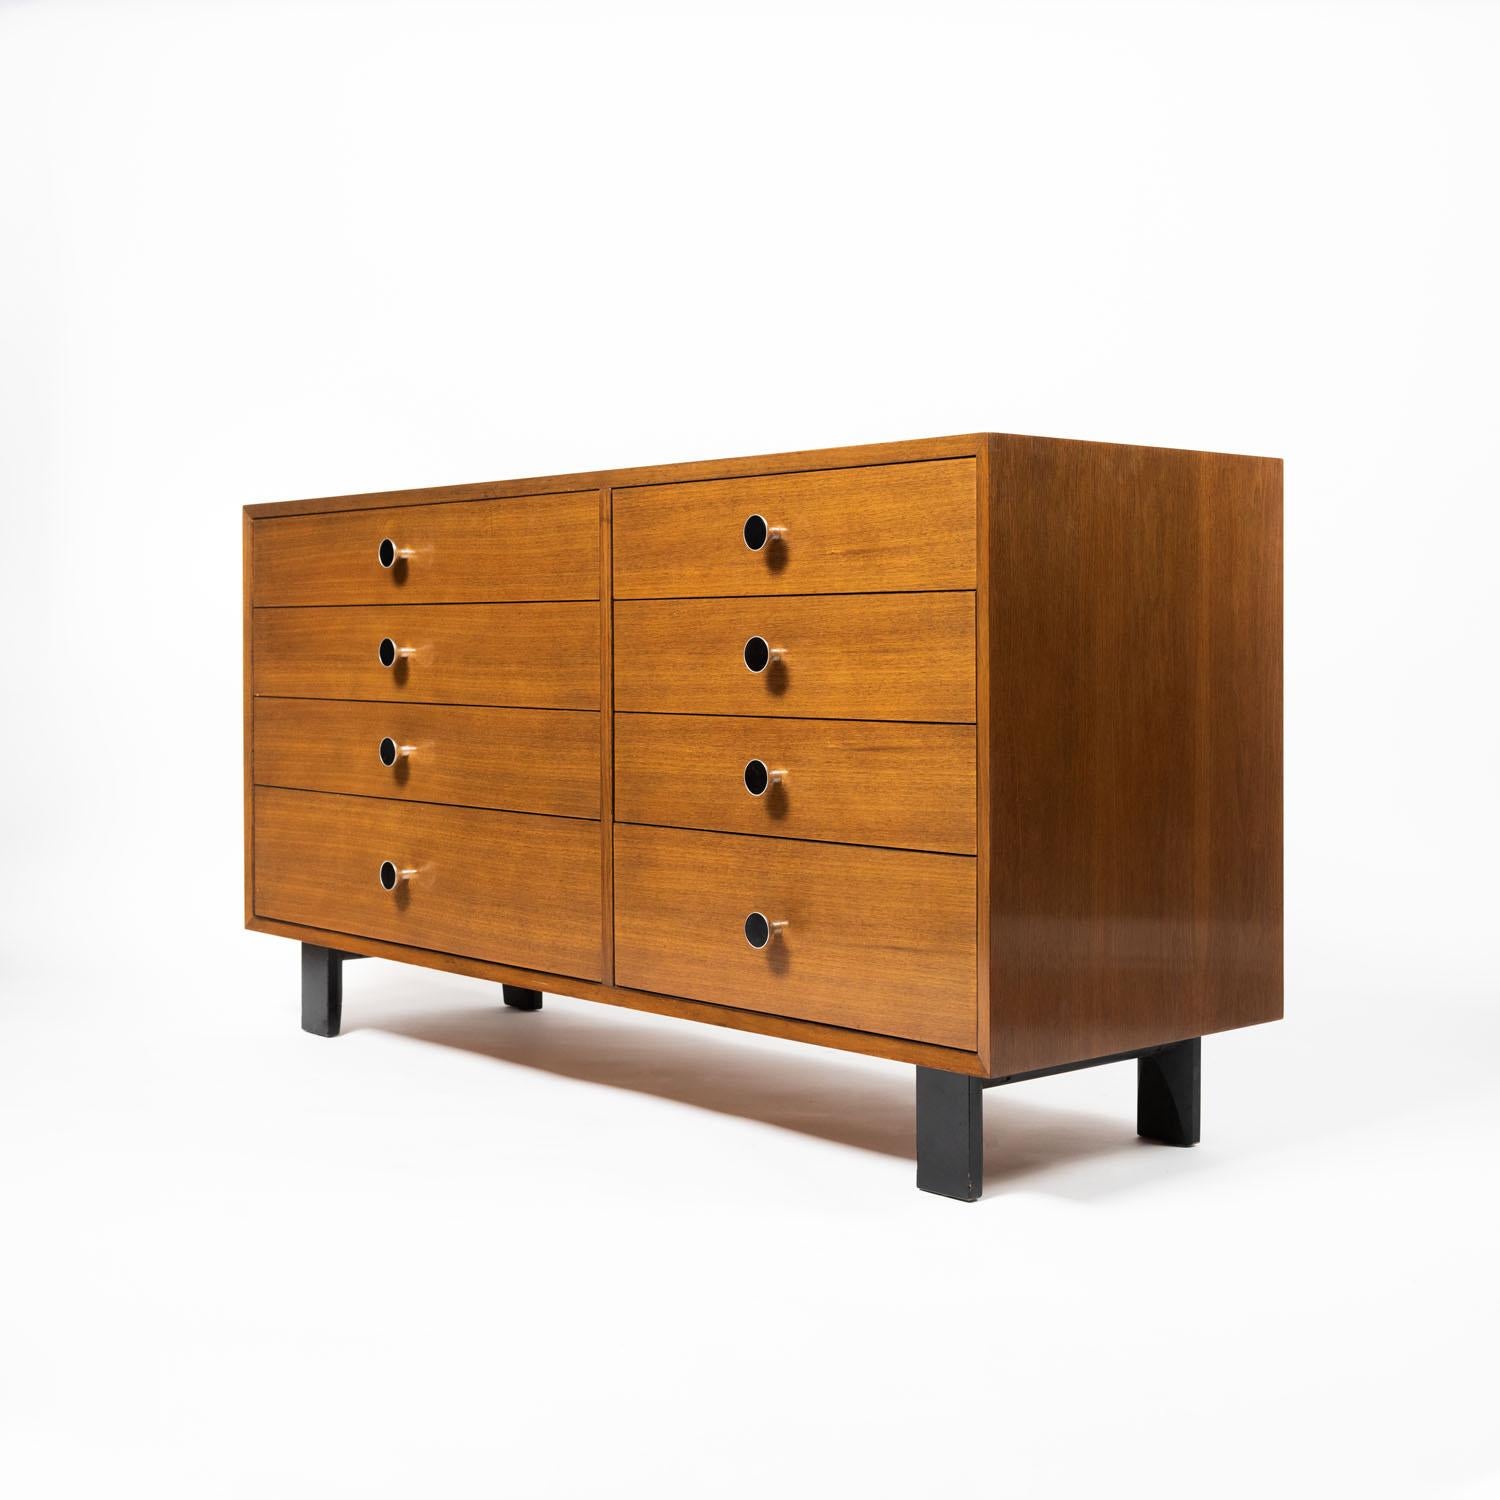 A George Nelson eight drawer dresser for Herman Miller in walnut with rare round pull handles in original black lacquer inlay, circa 1960s. Original George Nelson for Herman Miller label intact inside drawer and original finish. George Nelson was an